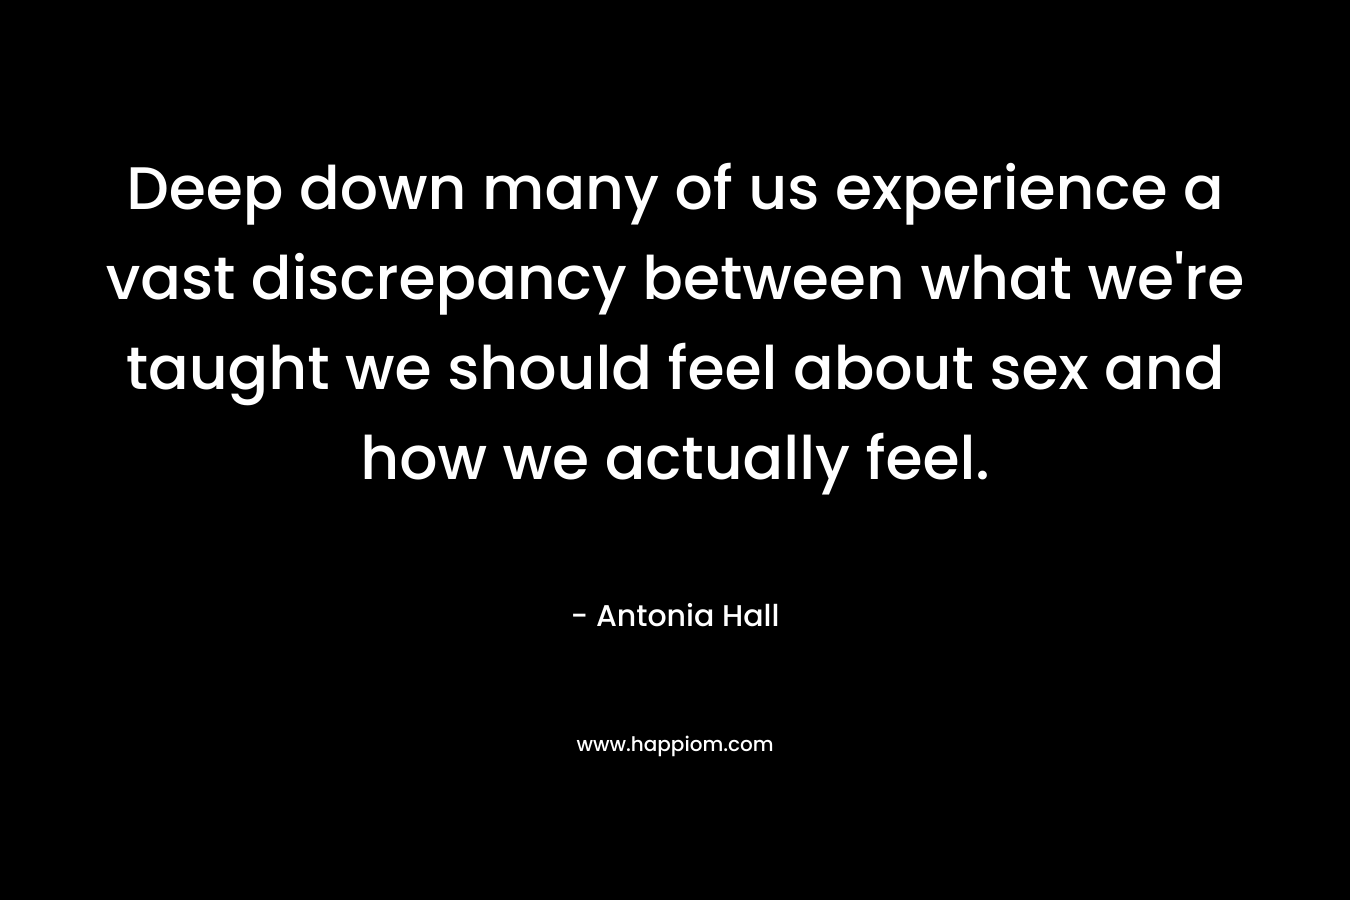 Deep down many of us experience a vast discrepancy between what we're taught we should feel about sex and how we actually feel.